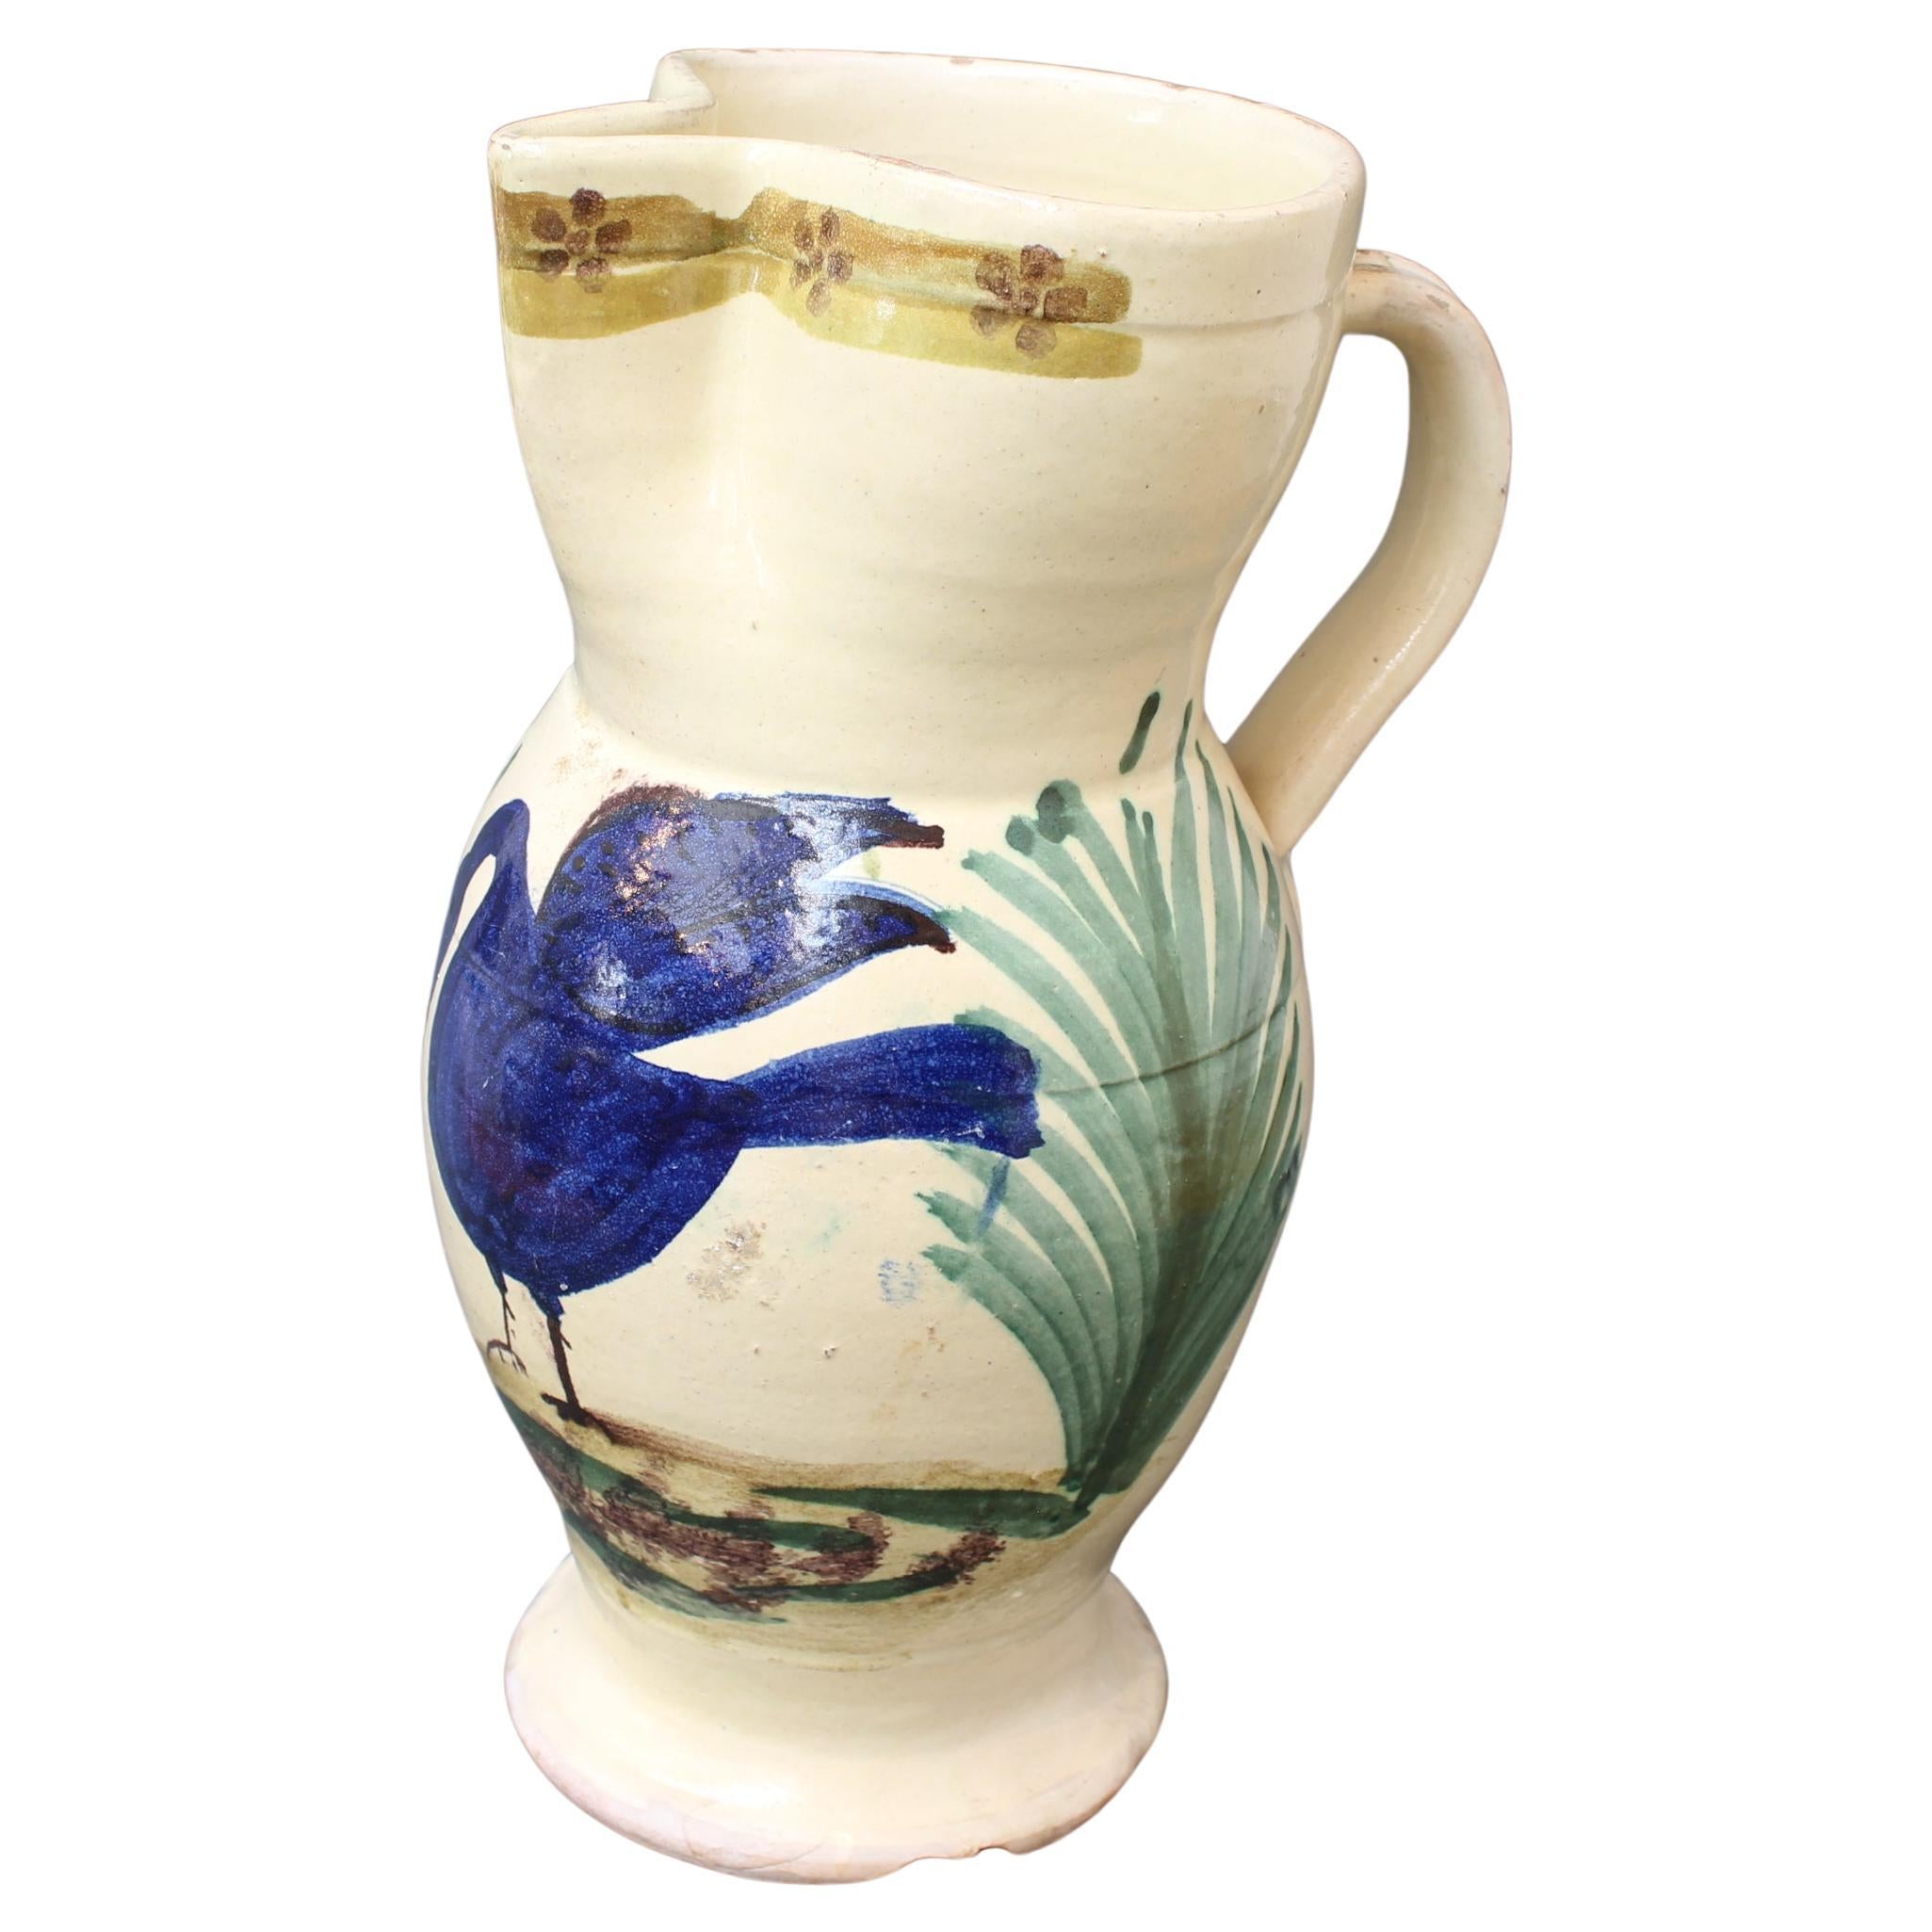 Ceramic antique water jug from Puglia in the South of Italy (circa late 19th C). A delightful example of a Pugliese pitcher decorated and shaped in the traditional way of the 19th Century. A gorgeous swan is painted in cobalt blue with greenery on